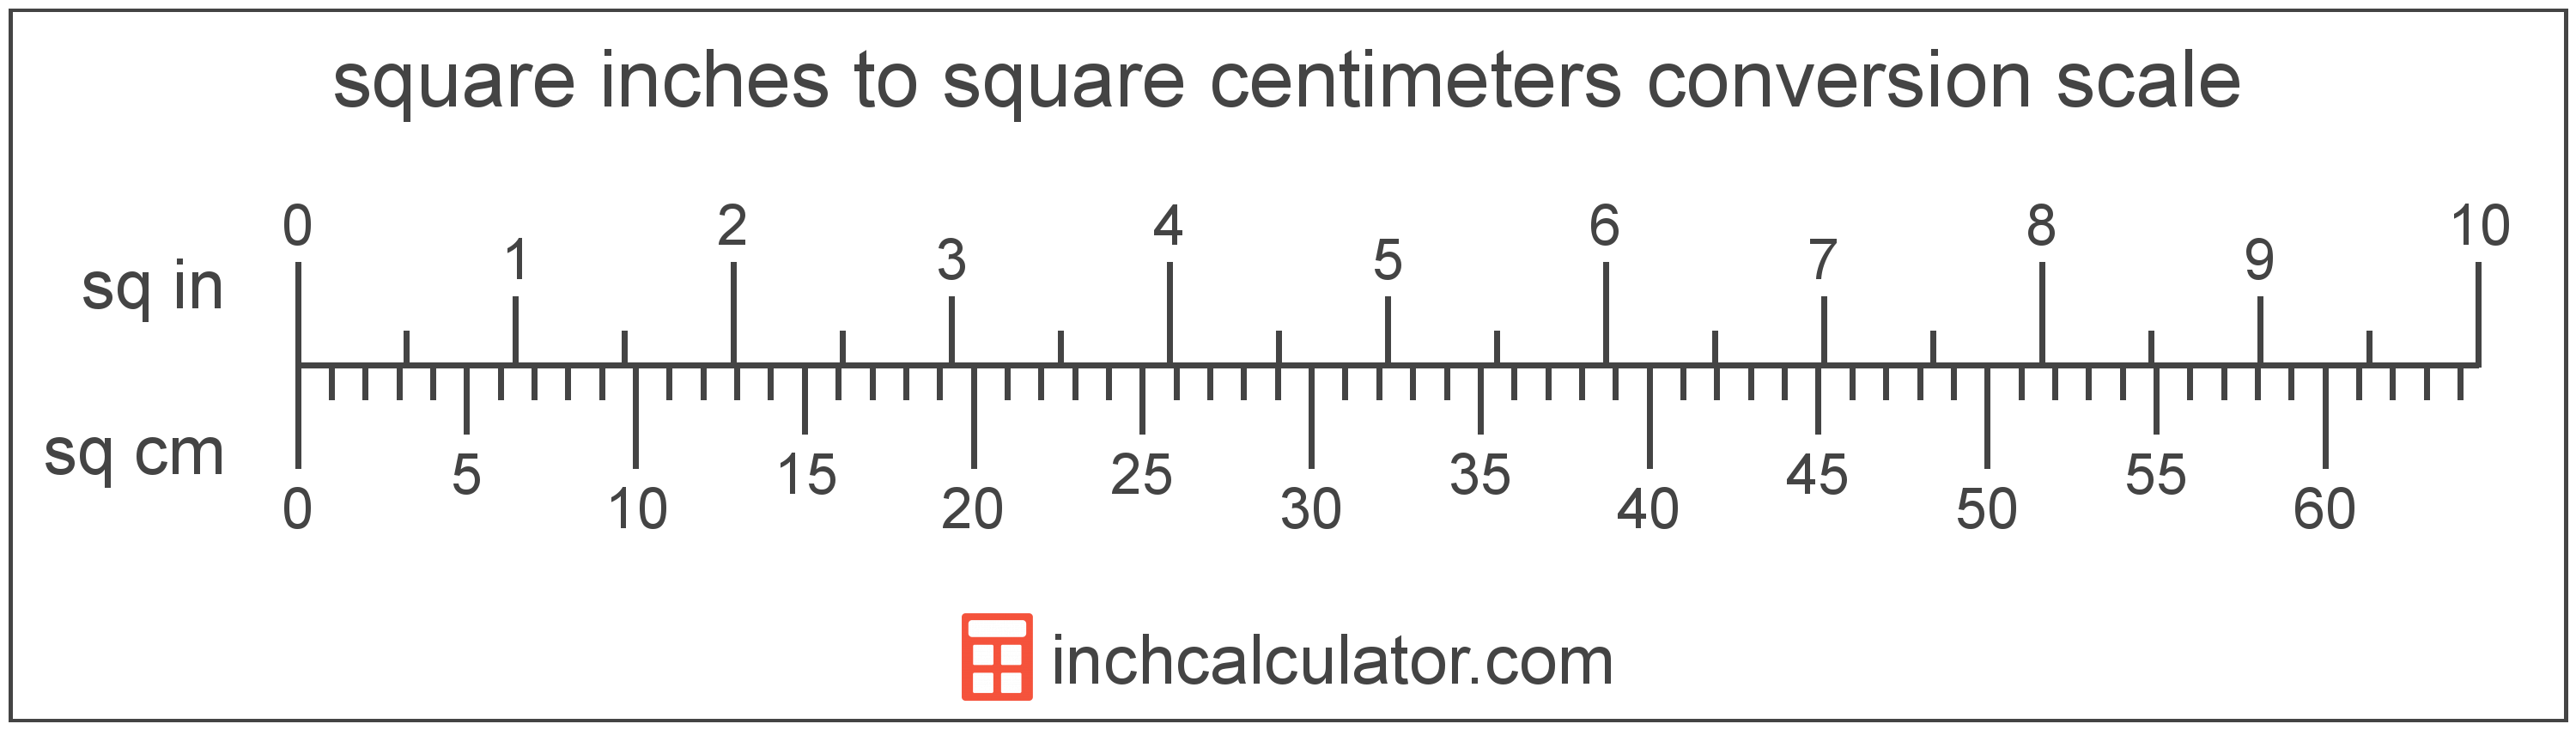 conversion scale showing square inches and equivalent square centimeters area values